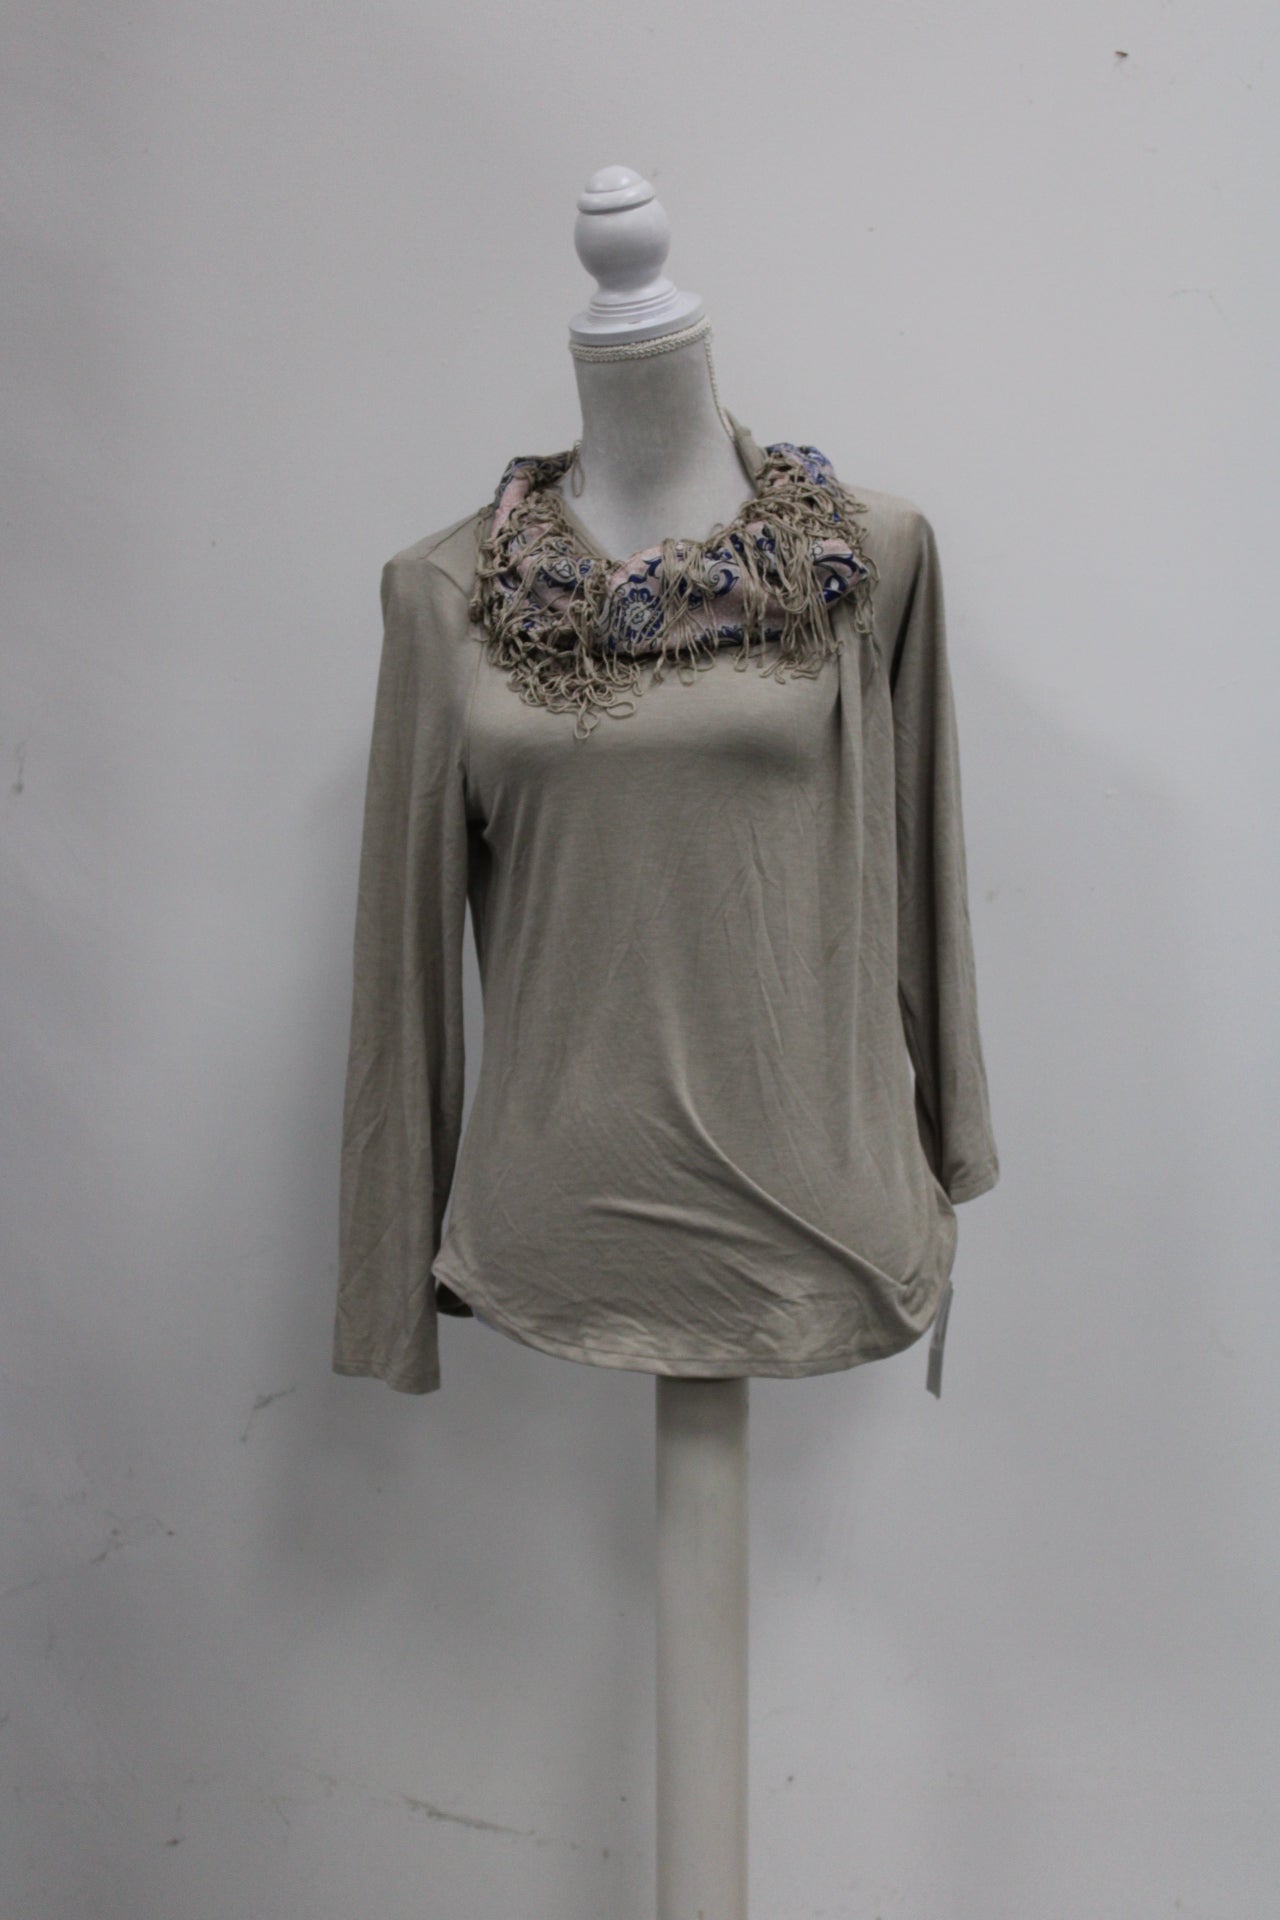 Style Co Petite Scarf-Neck Fringed Top Neutral Heather Pm